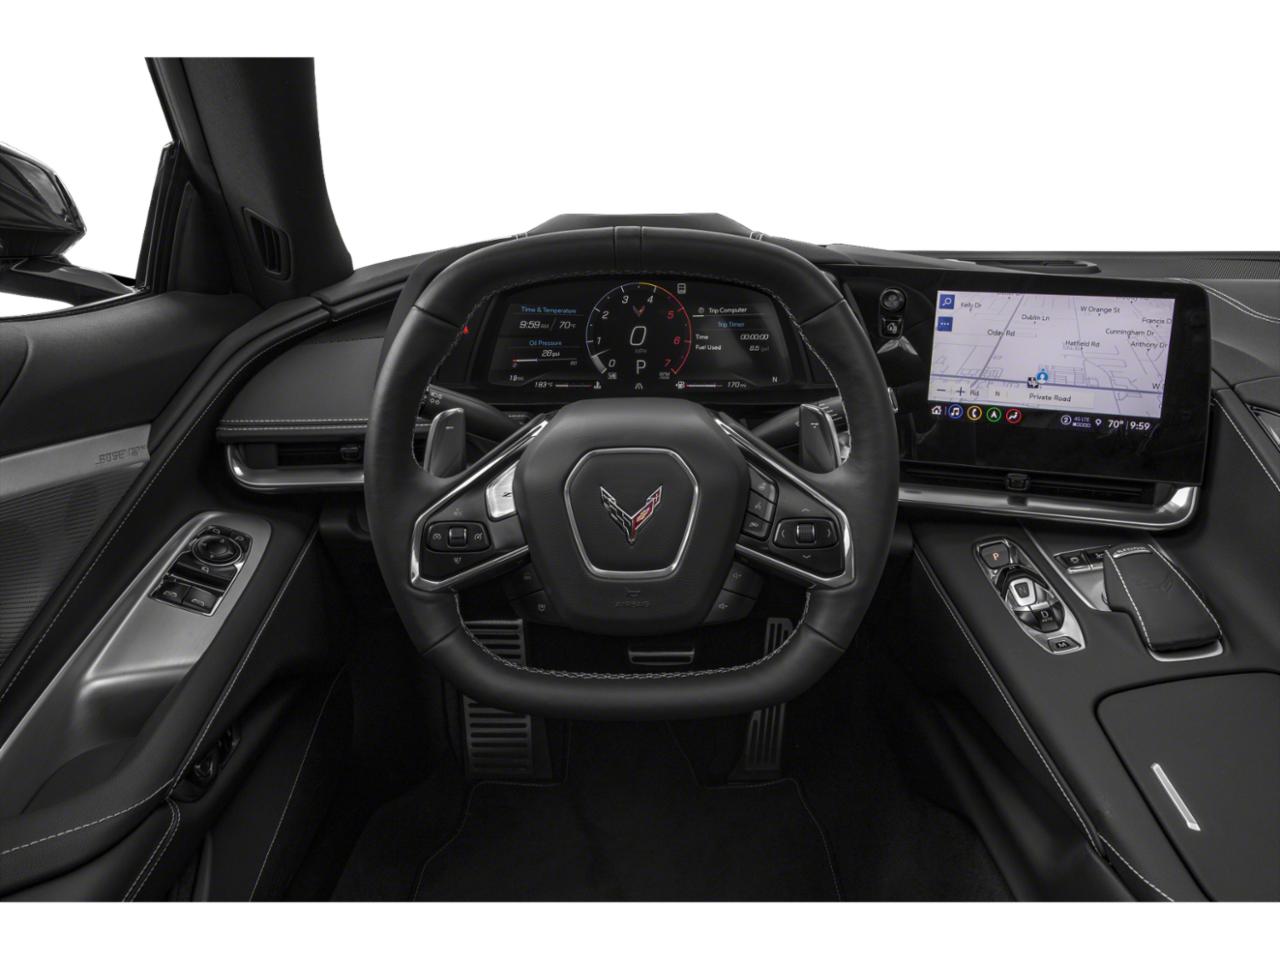 2021 Chevrolet Corvette Vehicle Photo in Clearwater, FL 33761